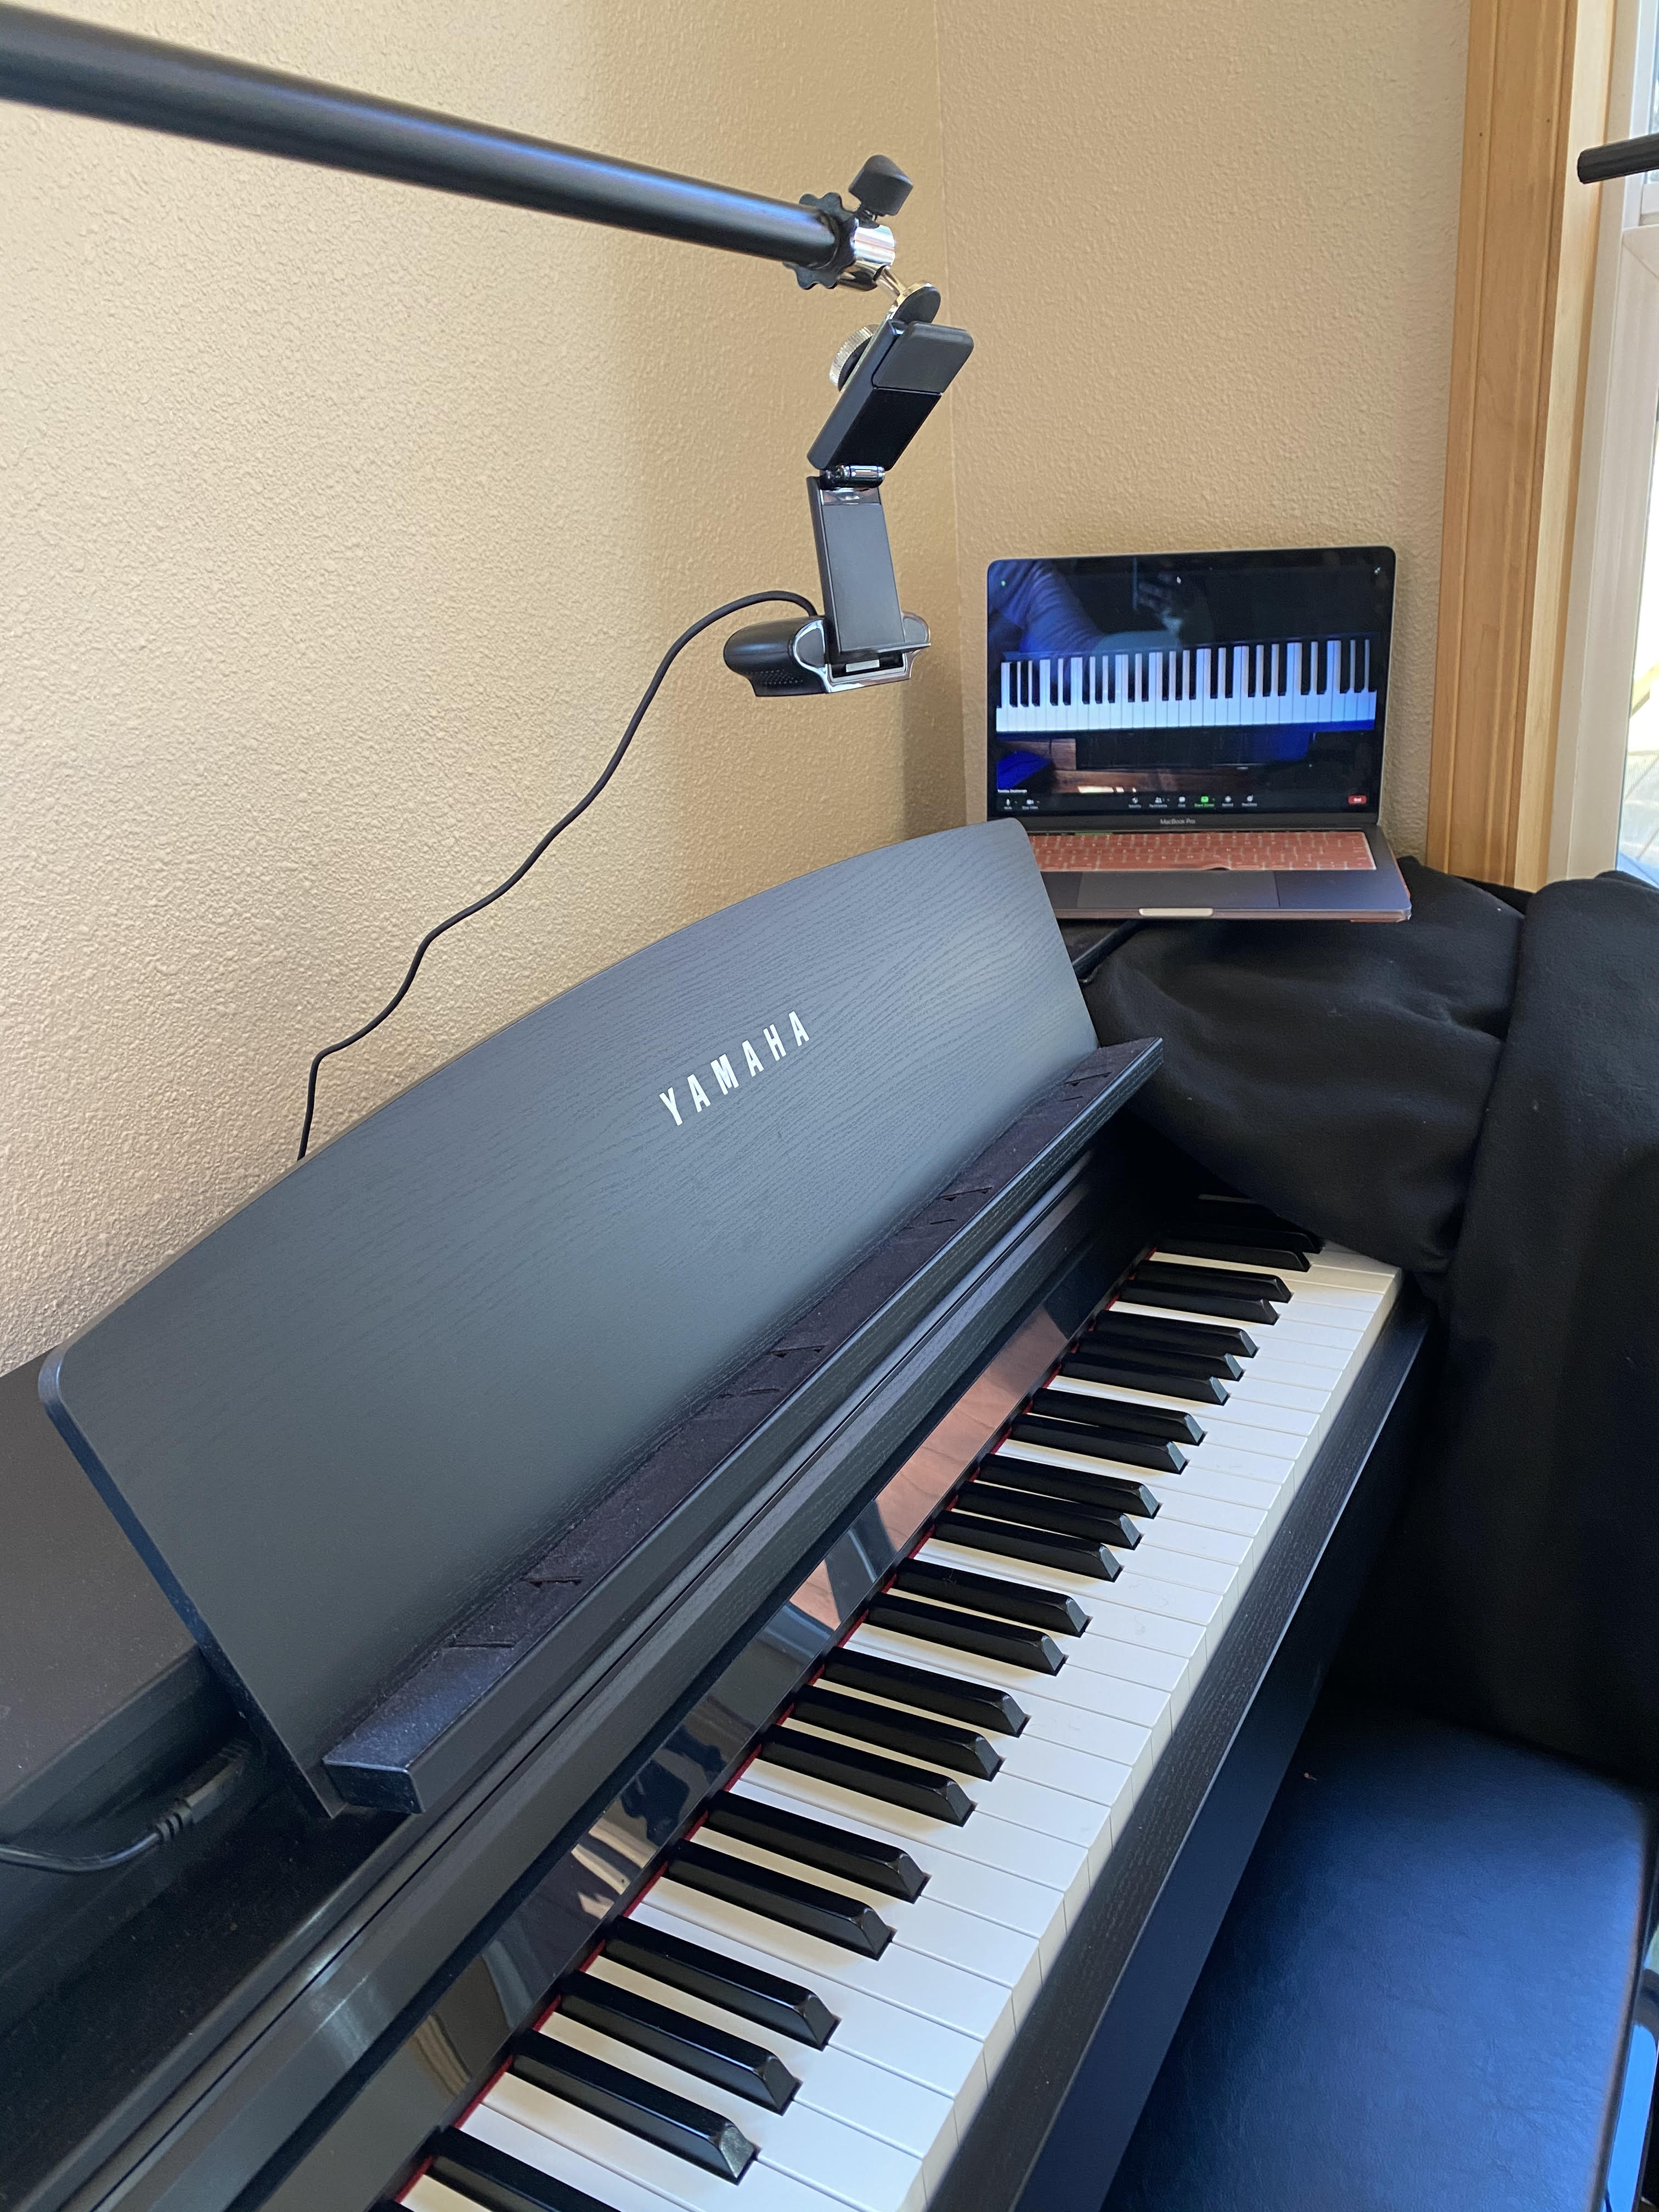 What Devices Should I Use For My Online Piano Lessons?